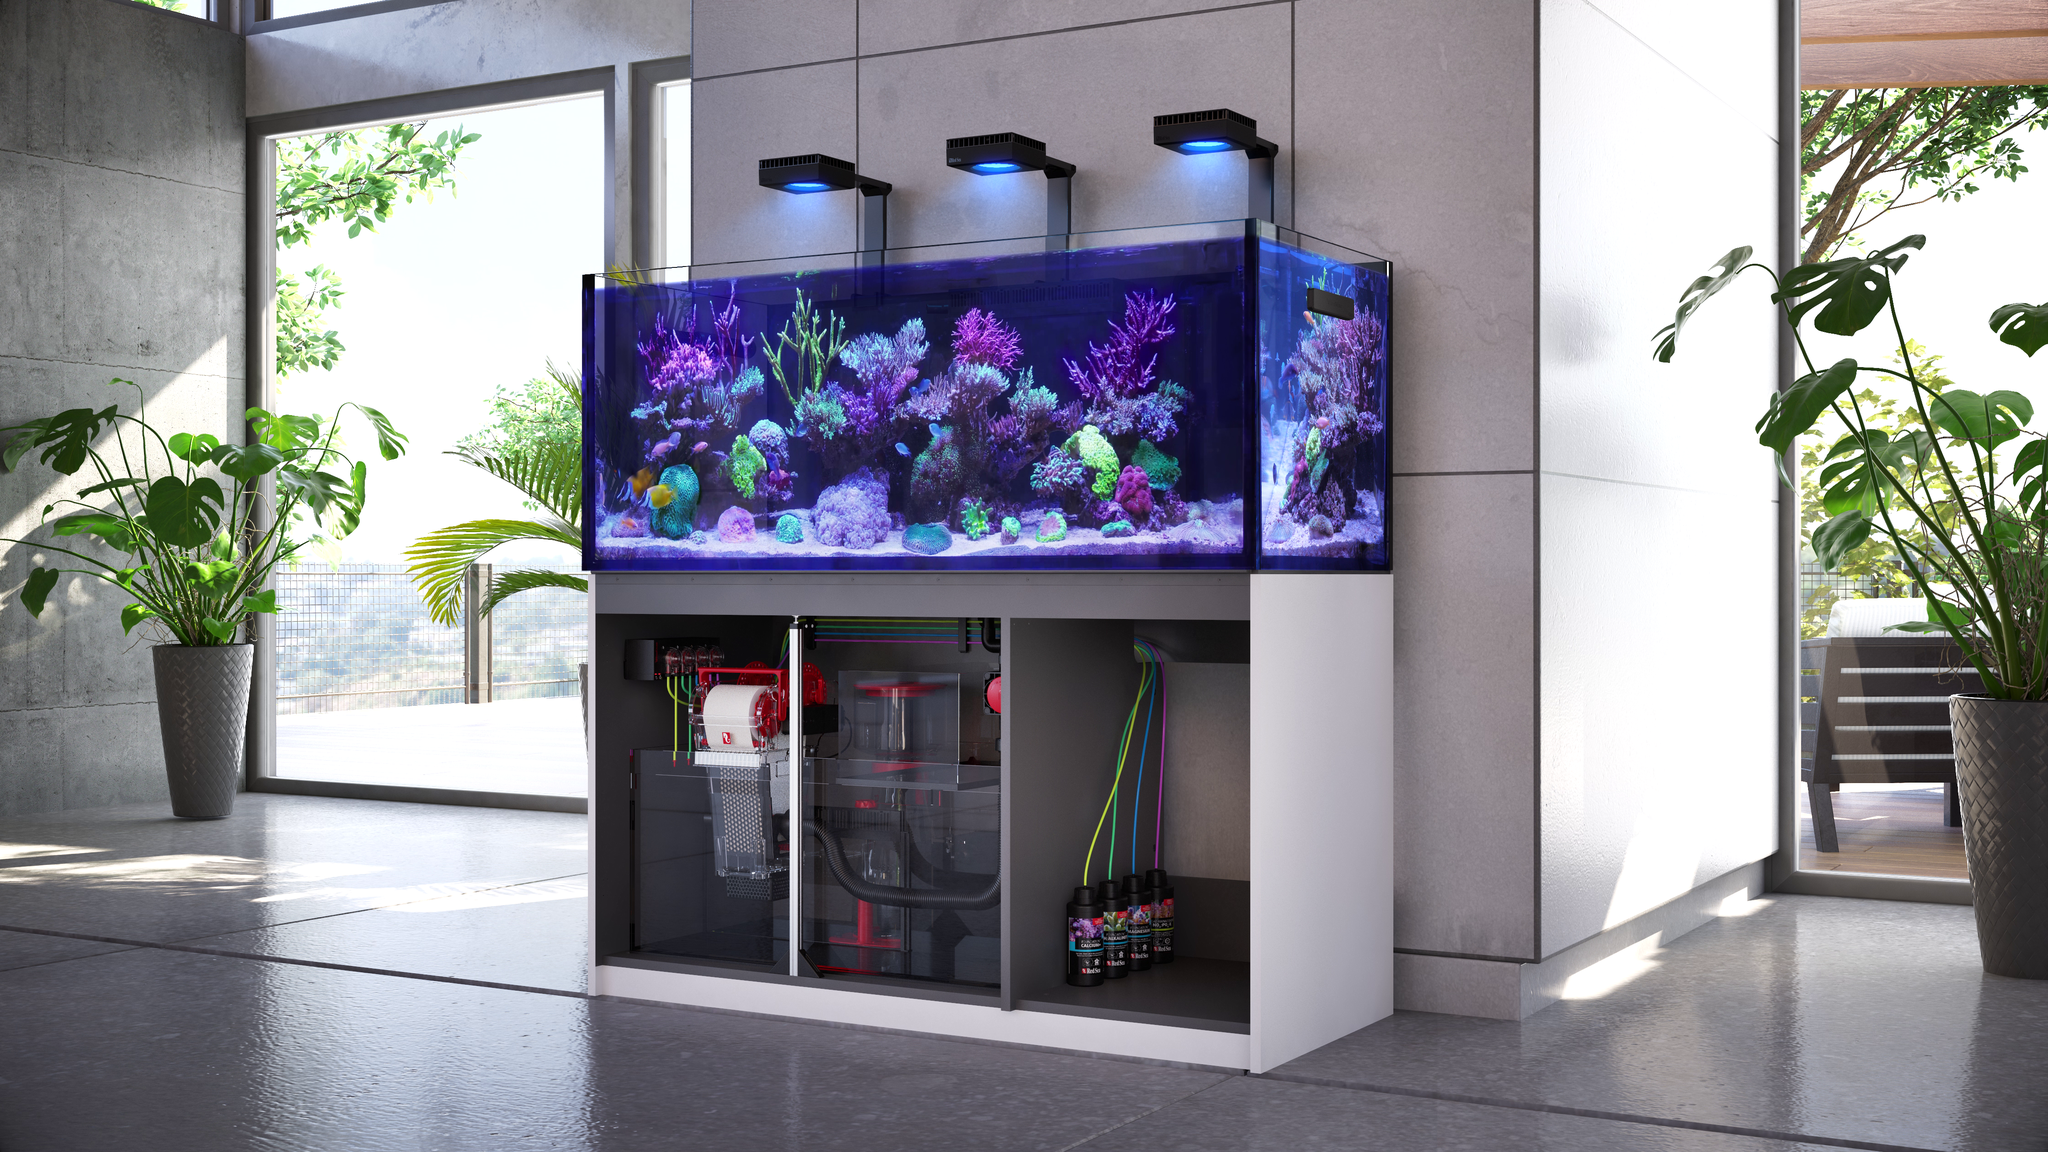 RED SEA Reefer 425 G2 Deluxe Complete System